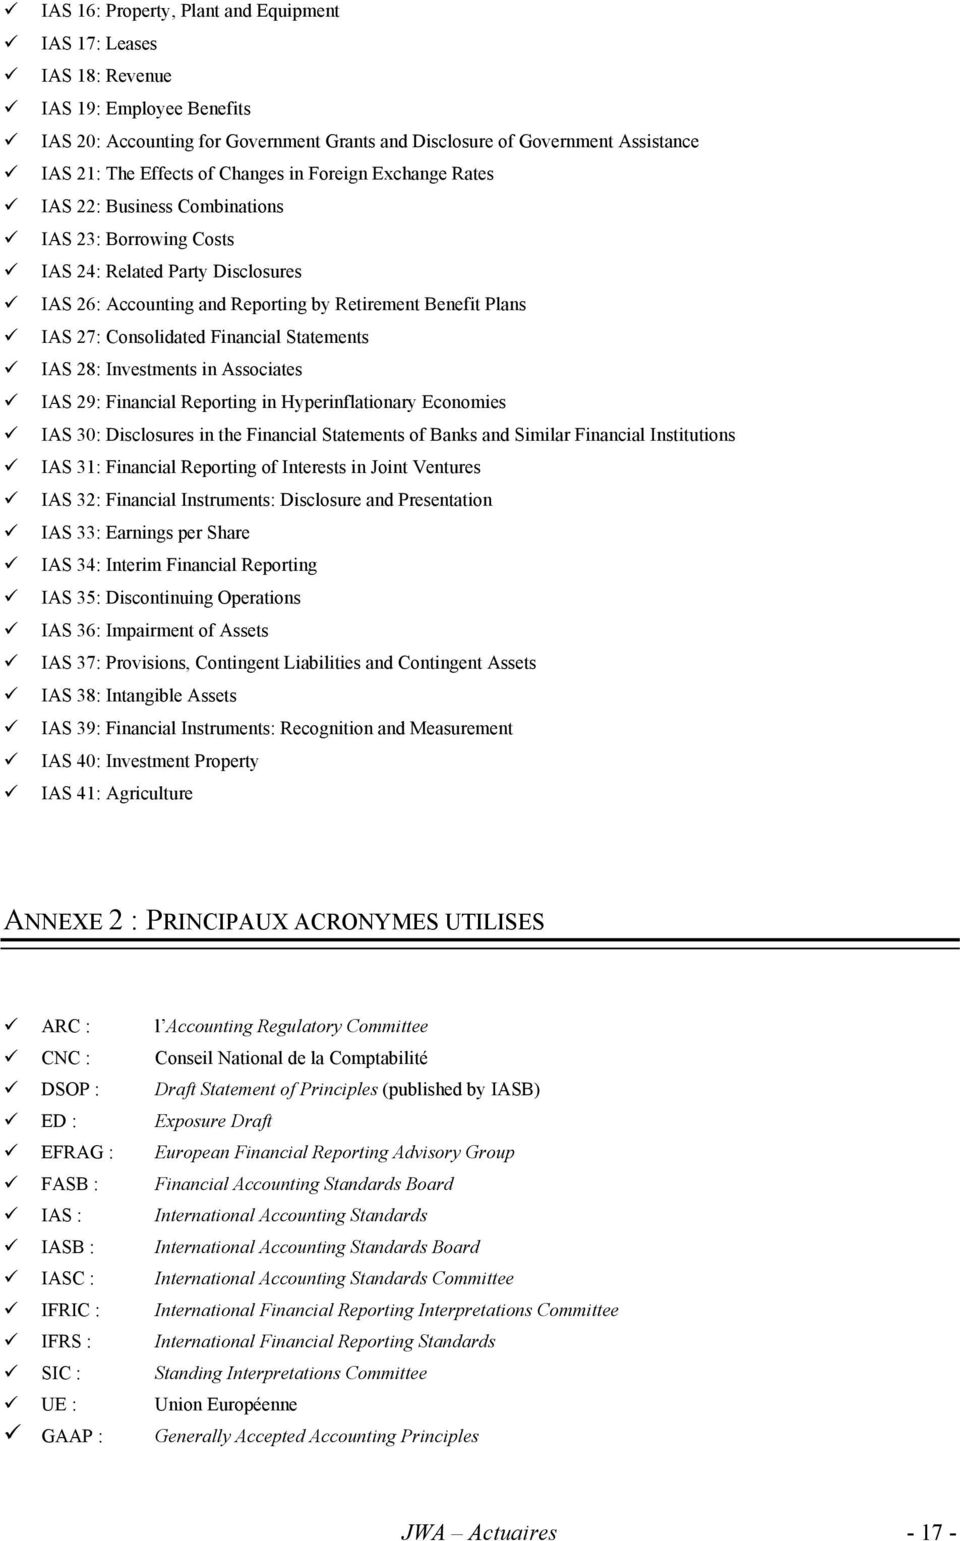 IAS 28: Invesmens in Associaes IAS 29: Financial Reporing in Hyperinflaionary Economies IAS 30: Disclosures in he Financial Saemens of Banks and Similar Financial Insiuions IAS 31: Financial Reporing